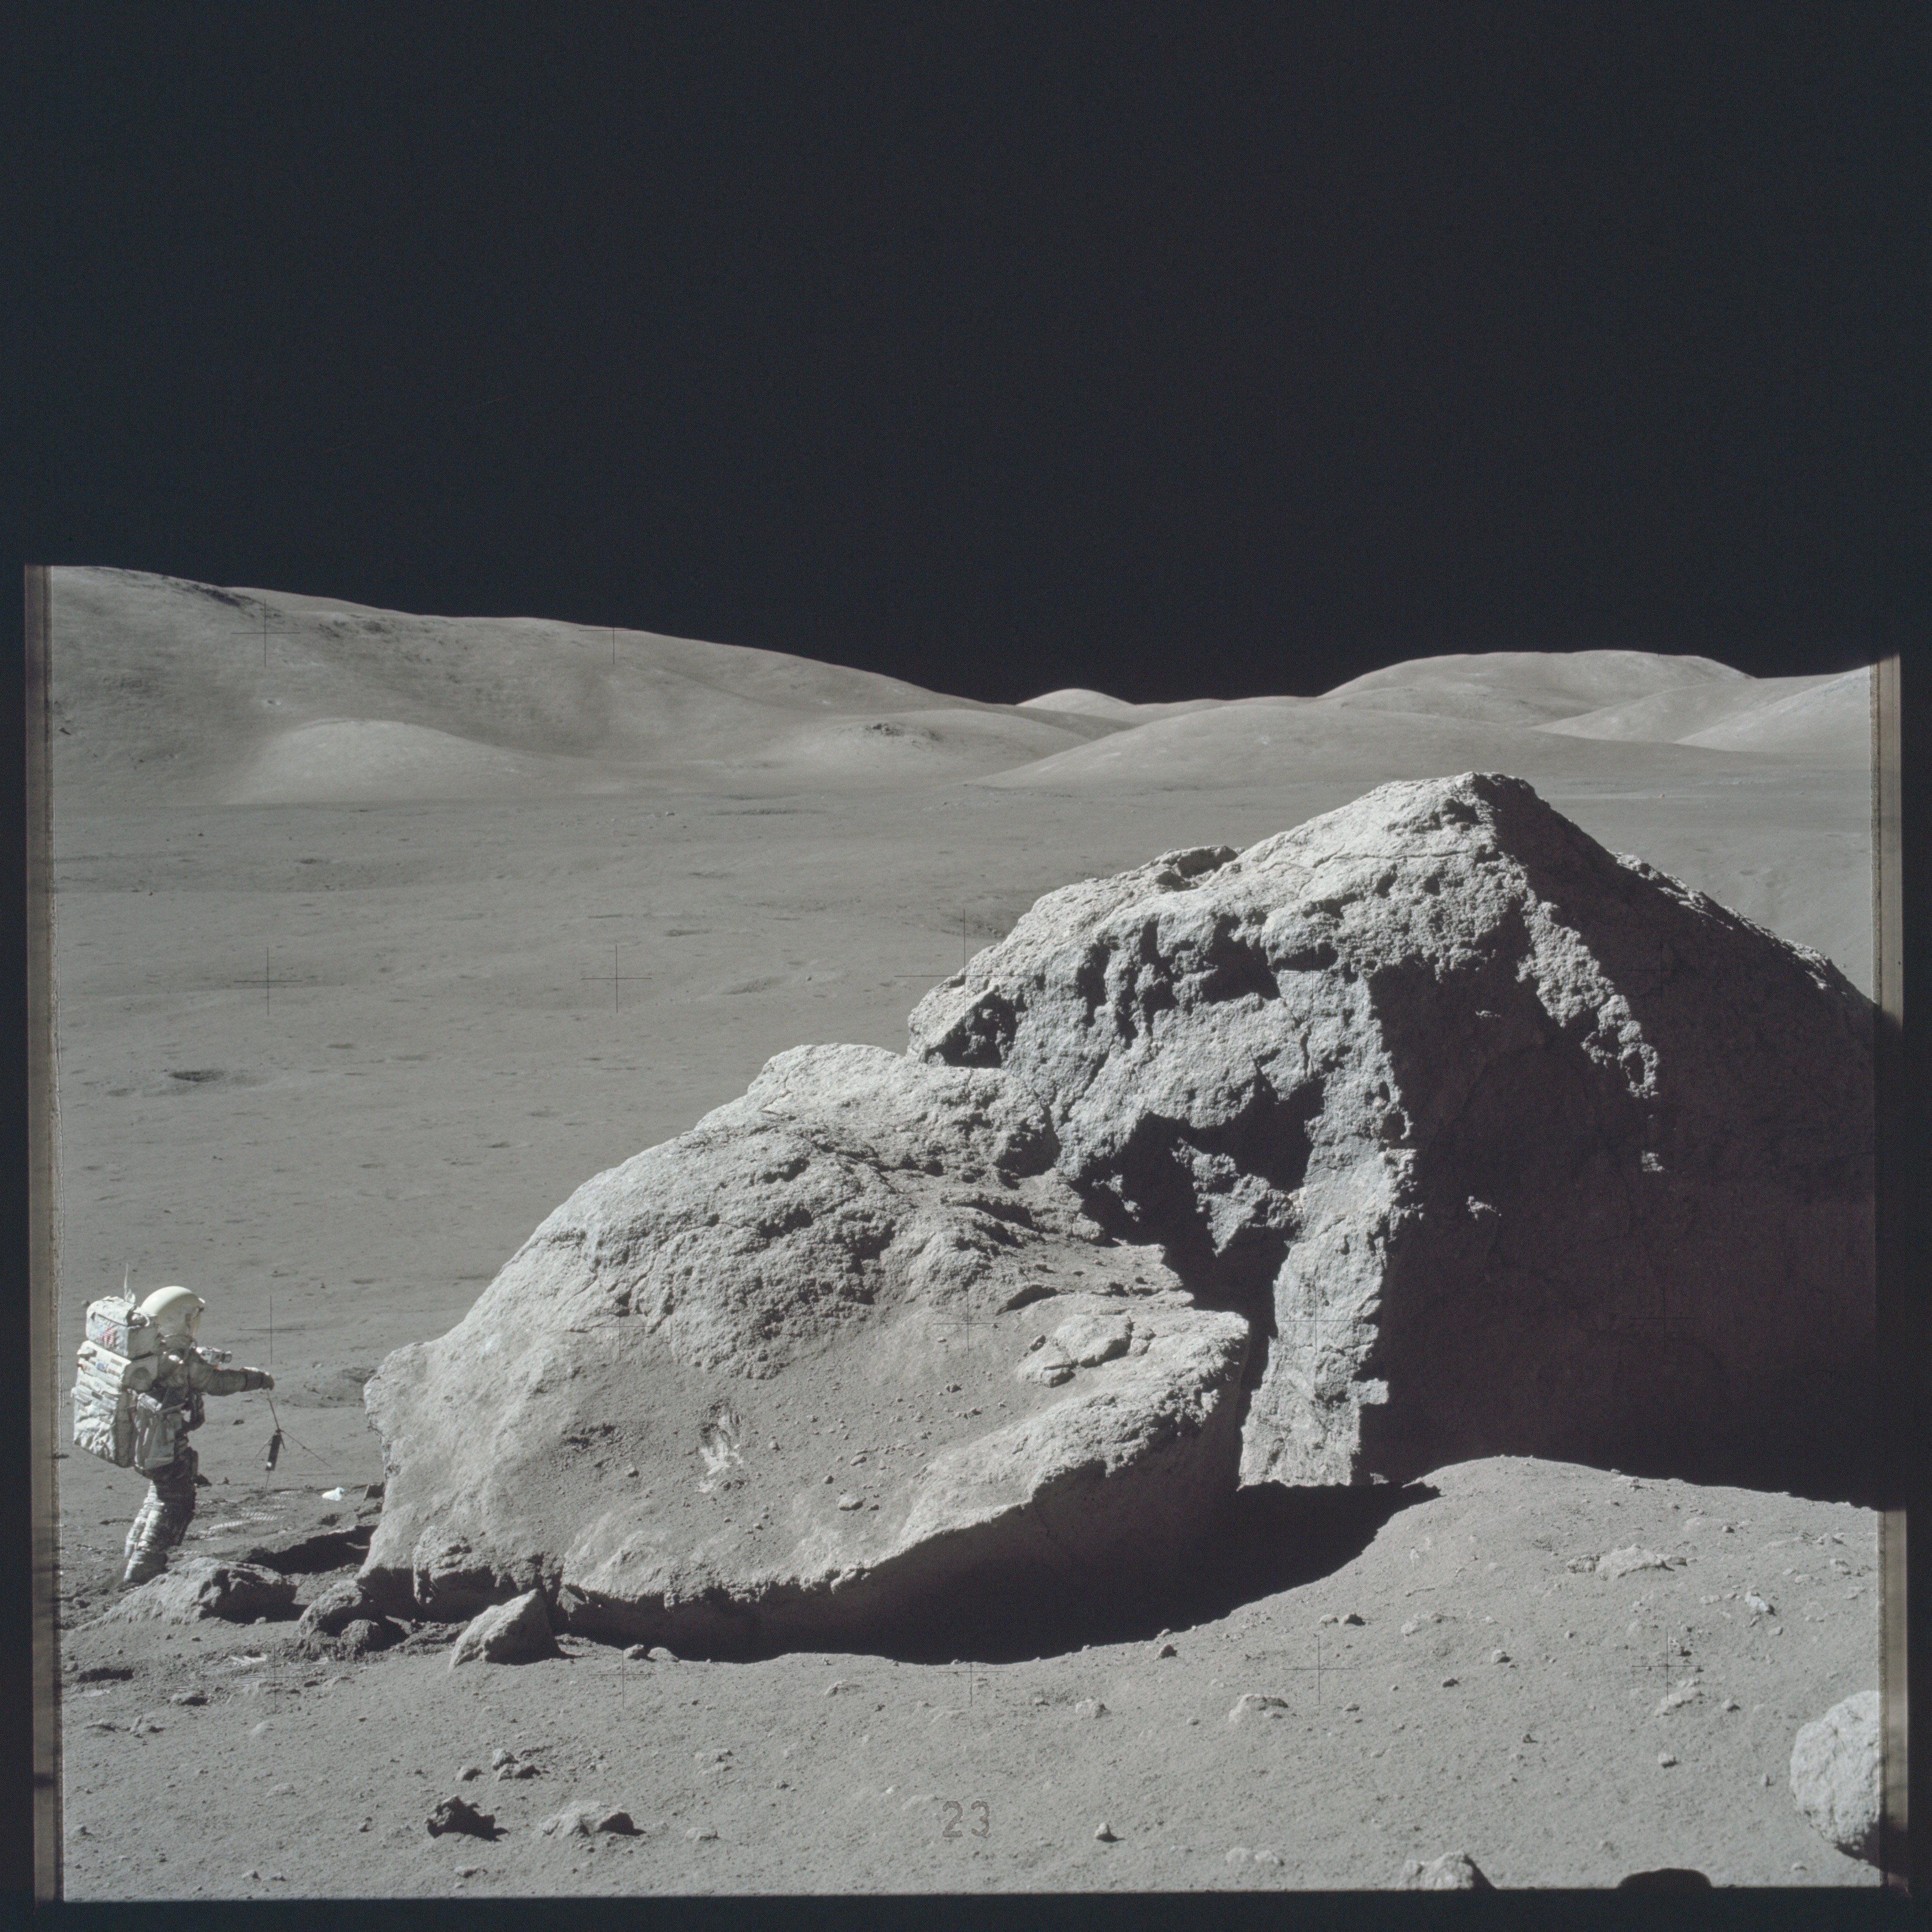 Scientist-astronaut Harrison Schmitt is photographed standing next to a huge, split boulder during the third Apollo 17 extravehicular activity (EVA) at the Taurus-Littrow landing site on the moon during the Apollo 17 mission in this December 13, 1972 NASA handout photo. Photo: Reuters